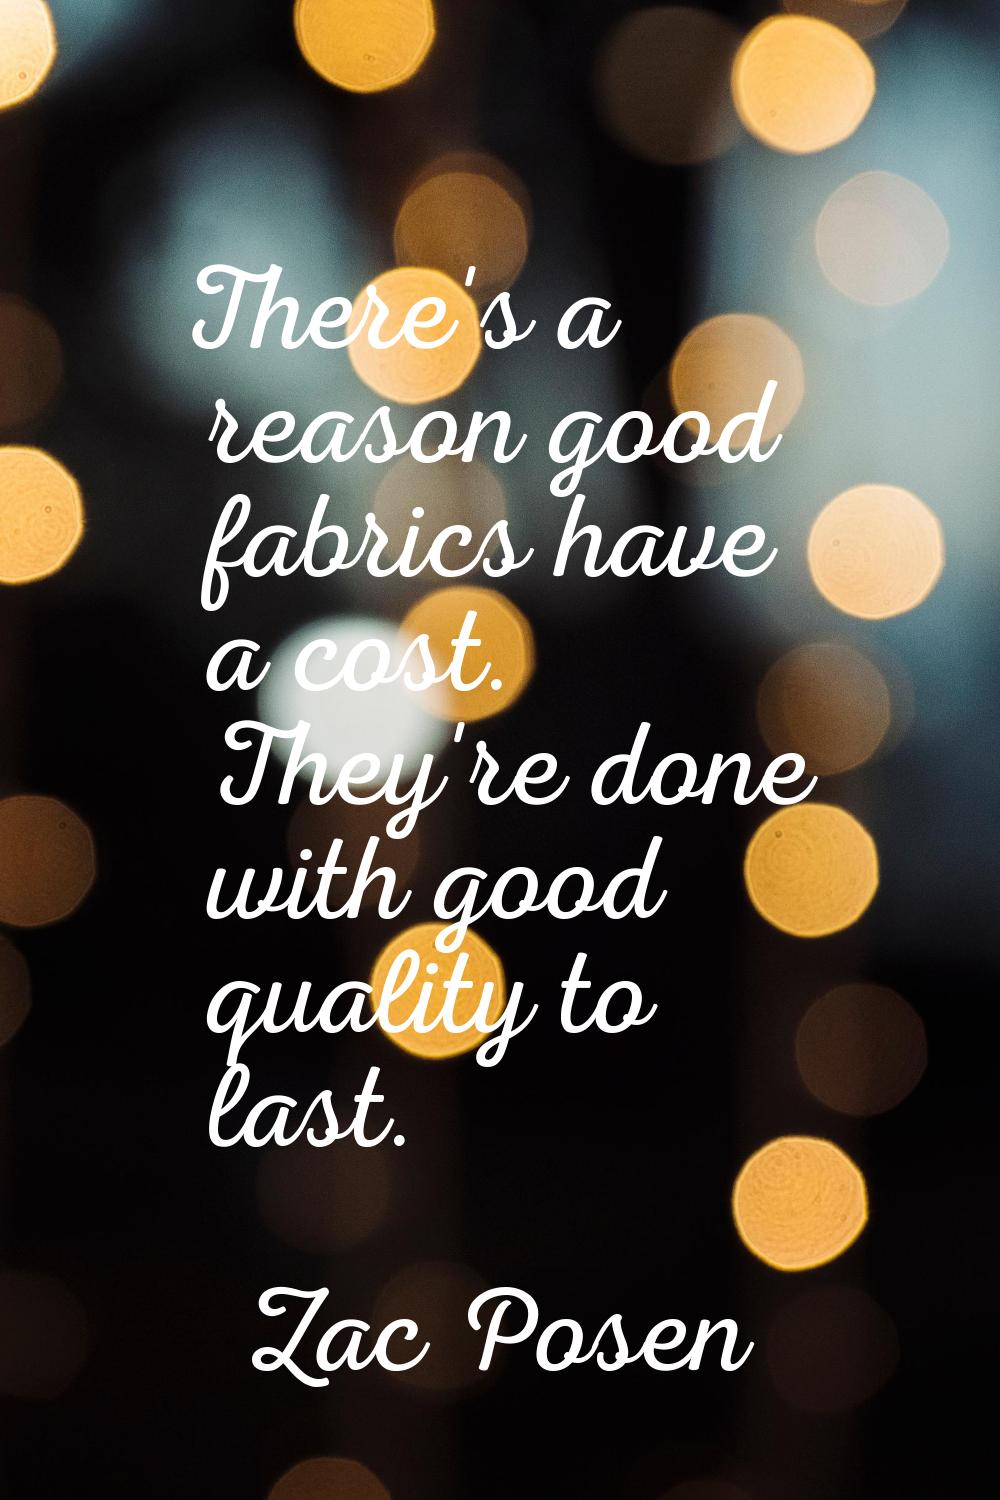 There's a reason good fabrics have a cost. They're done with good quality to last.